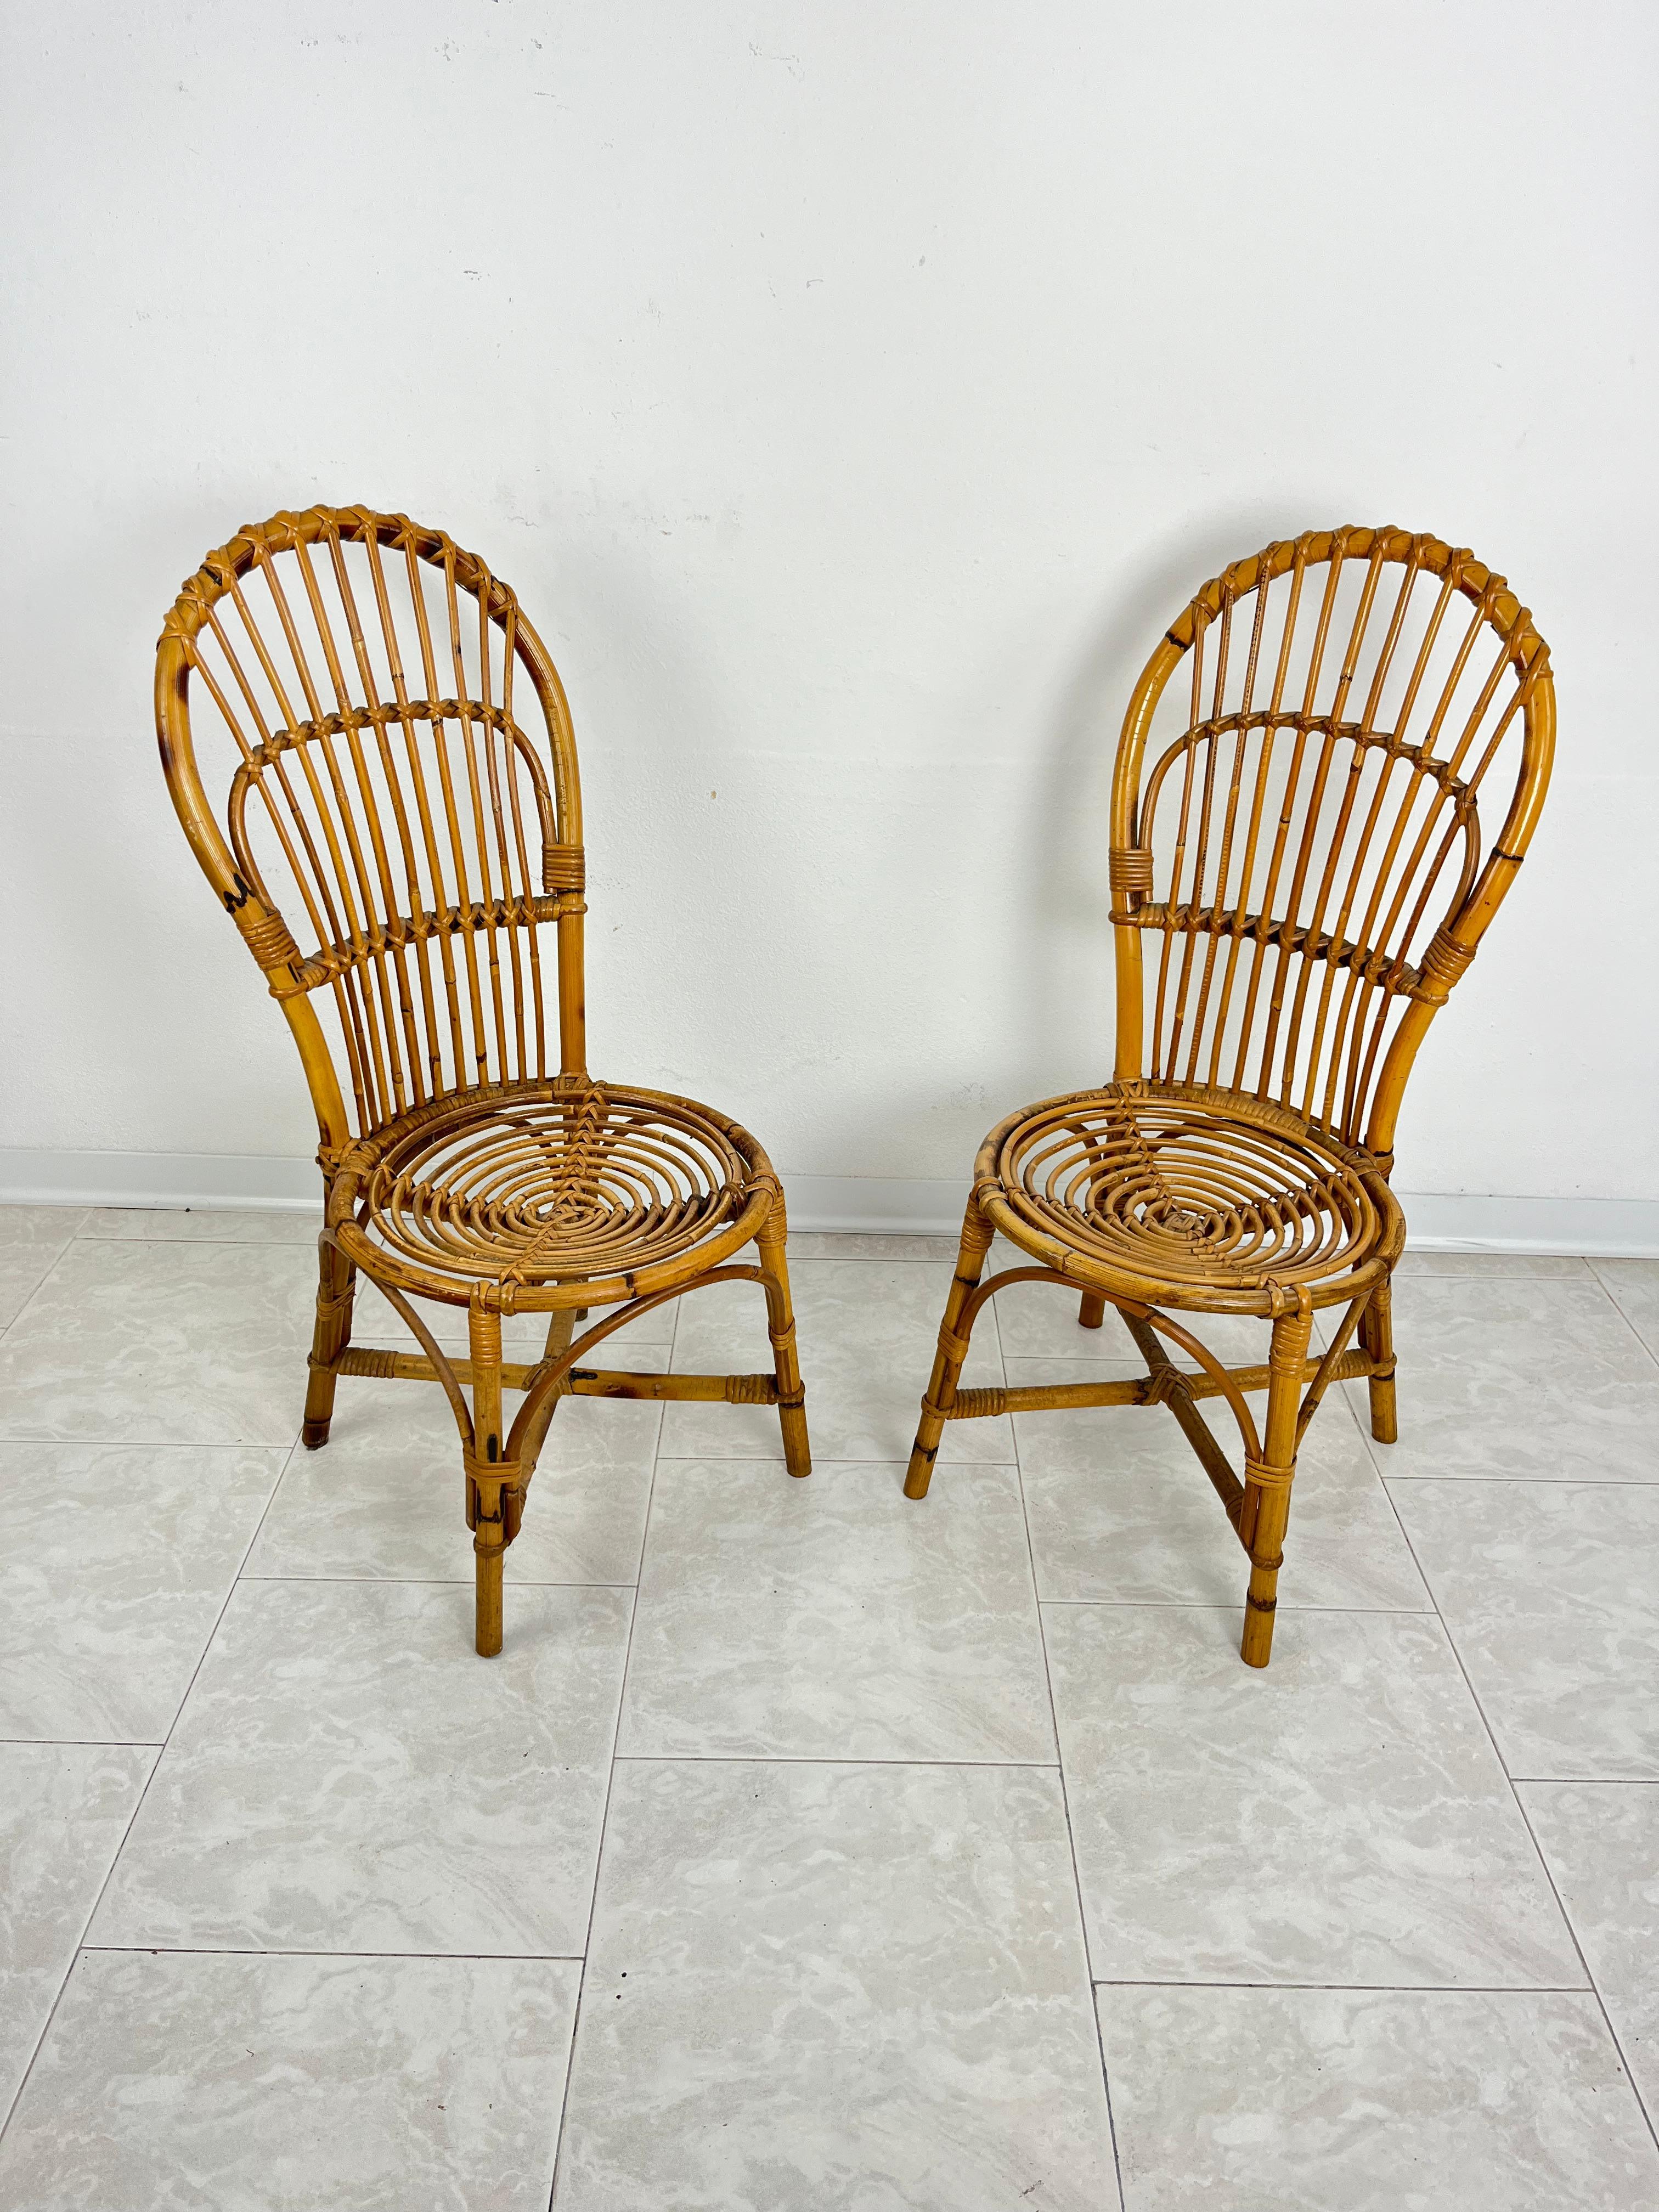 Set of 2 Small Mid-Century Bamboo Chairs, Italian Design 1950s For Sale 1